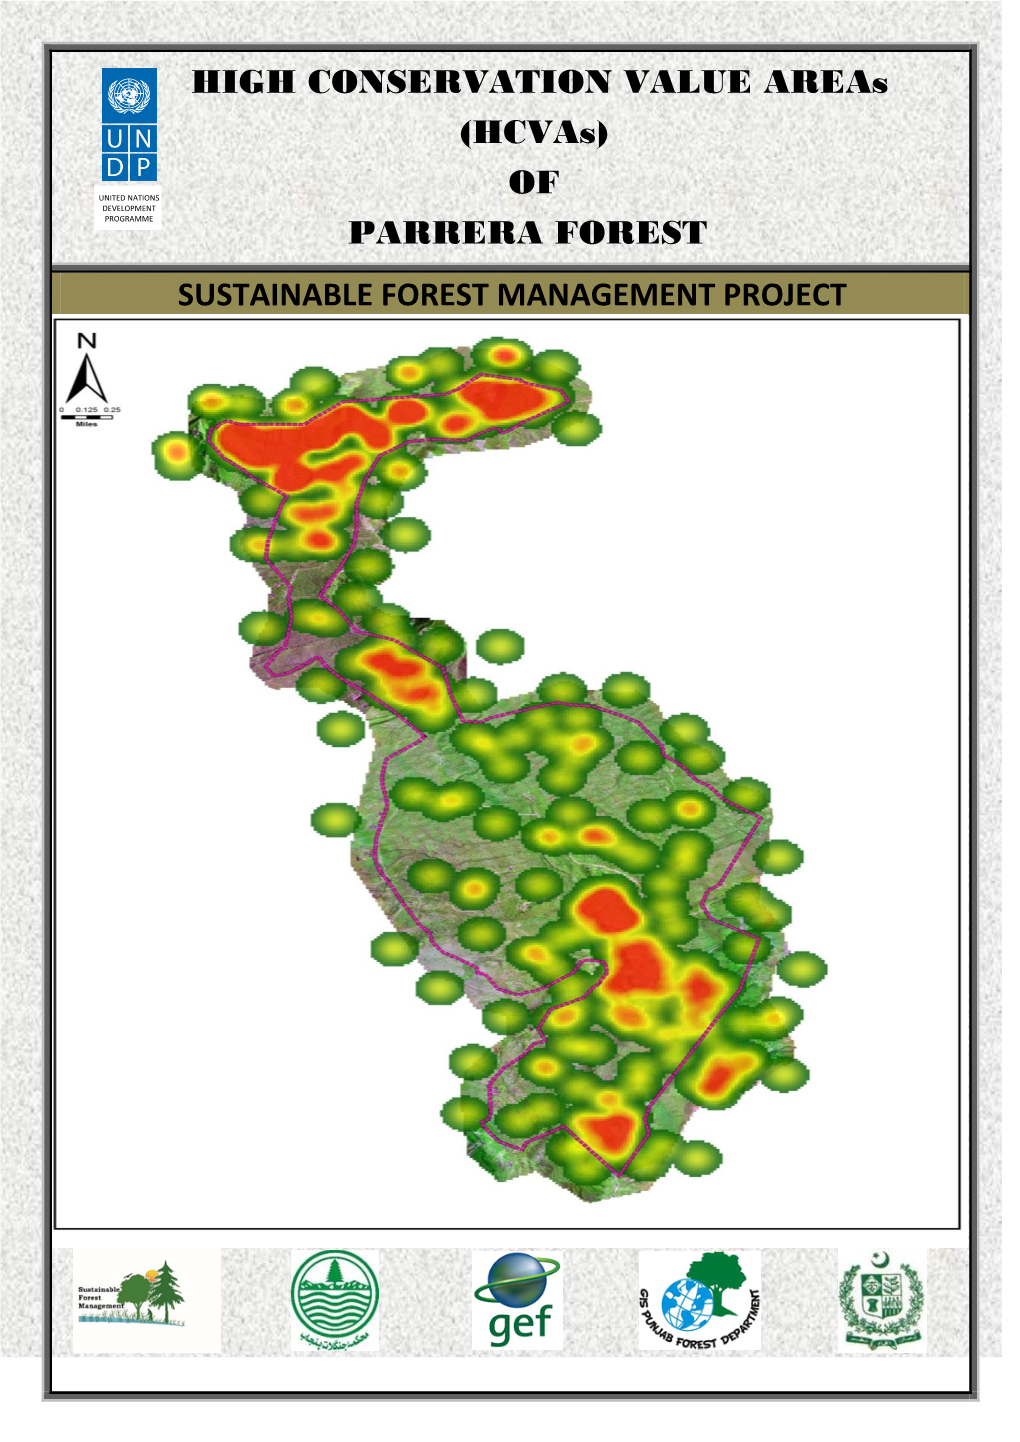 HIGH CONSERVATION VALUE Areas (Hcvas) of PARRERA FOREST SUSTAINABLE FOREST MANAGEMENT PROJECT